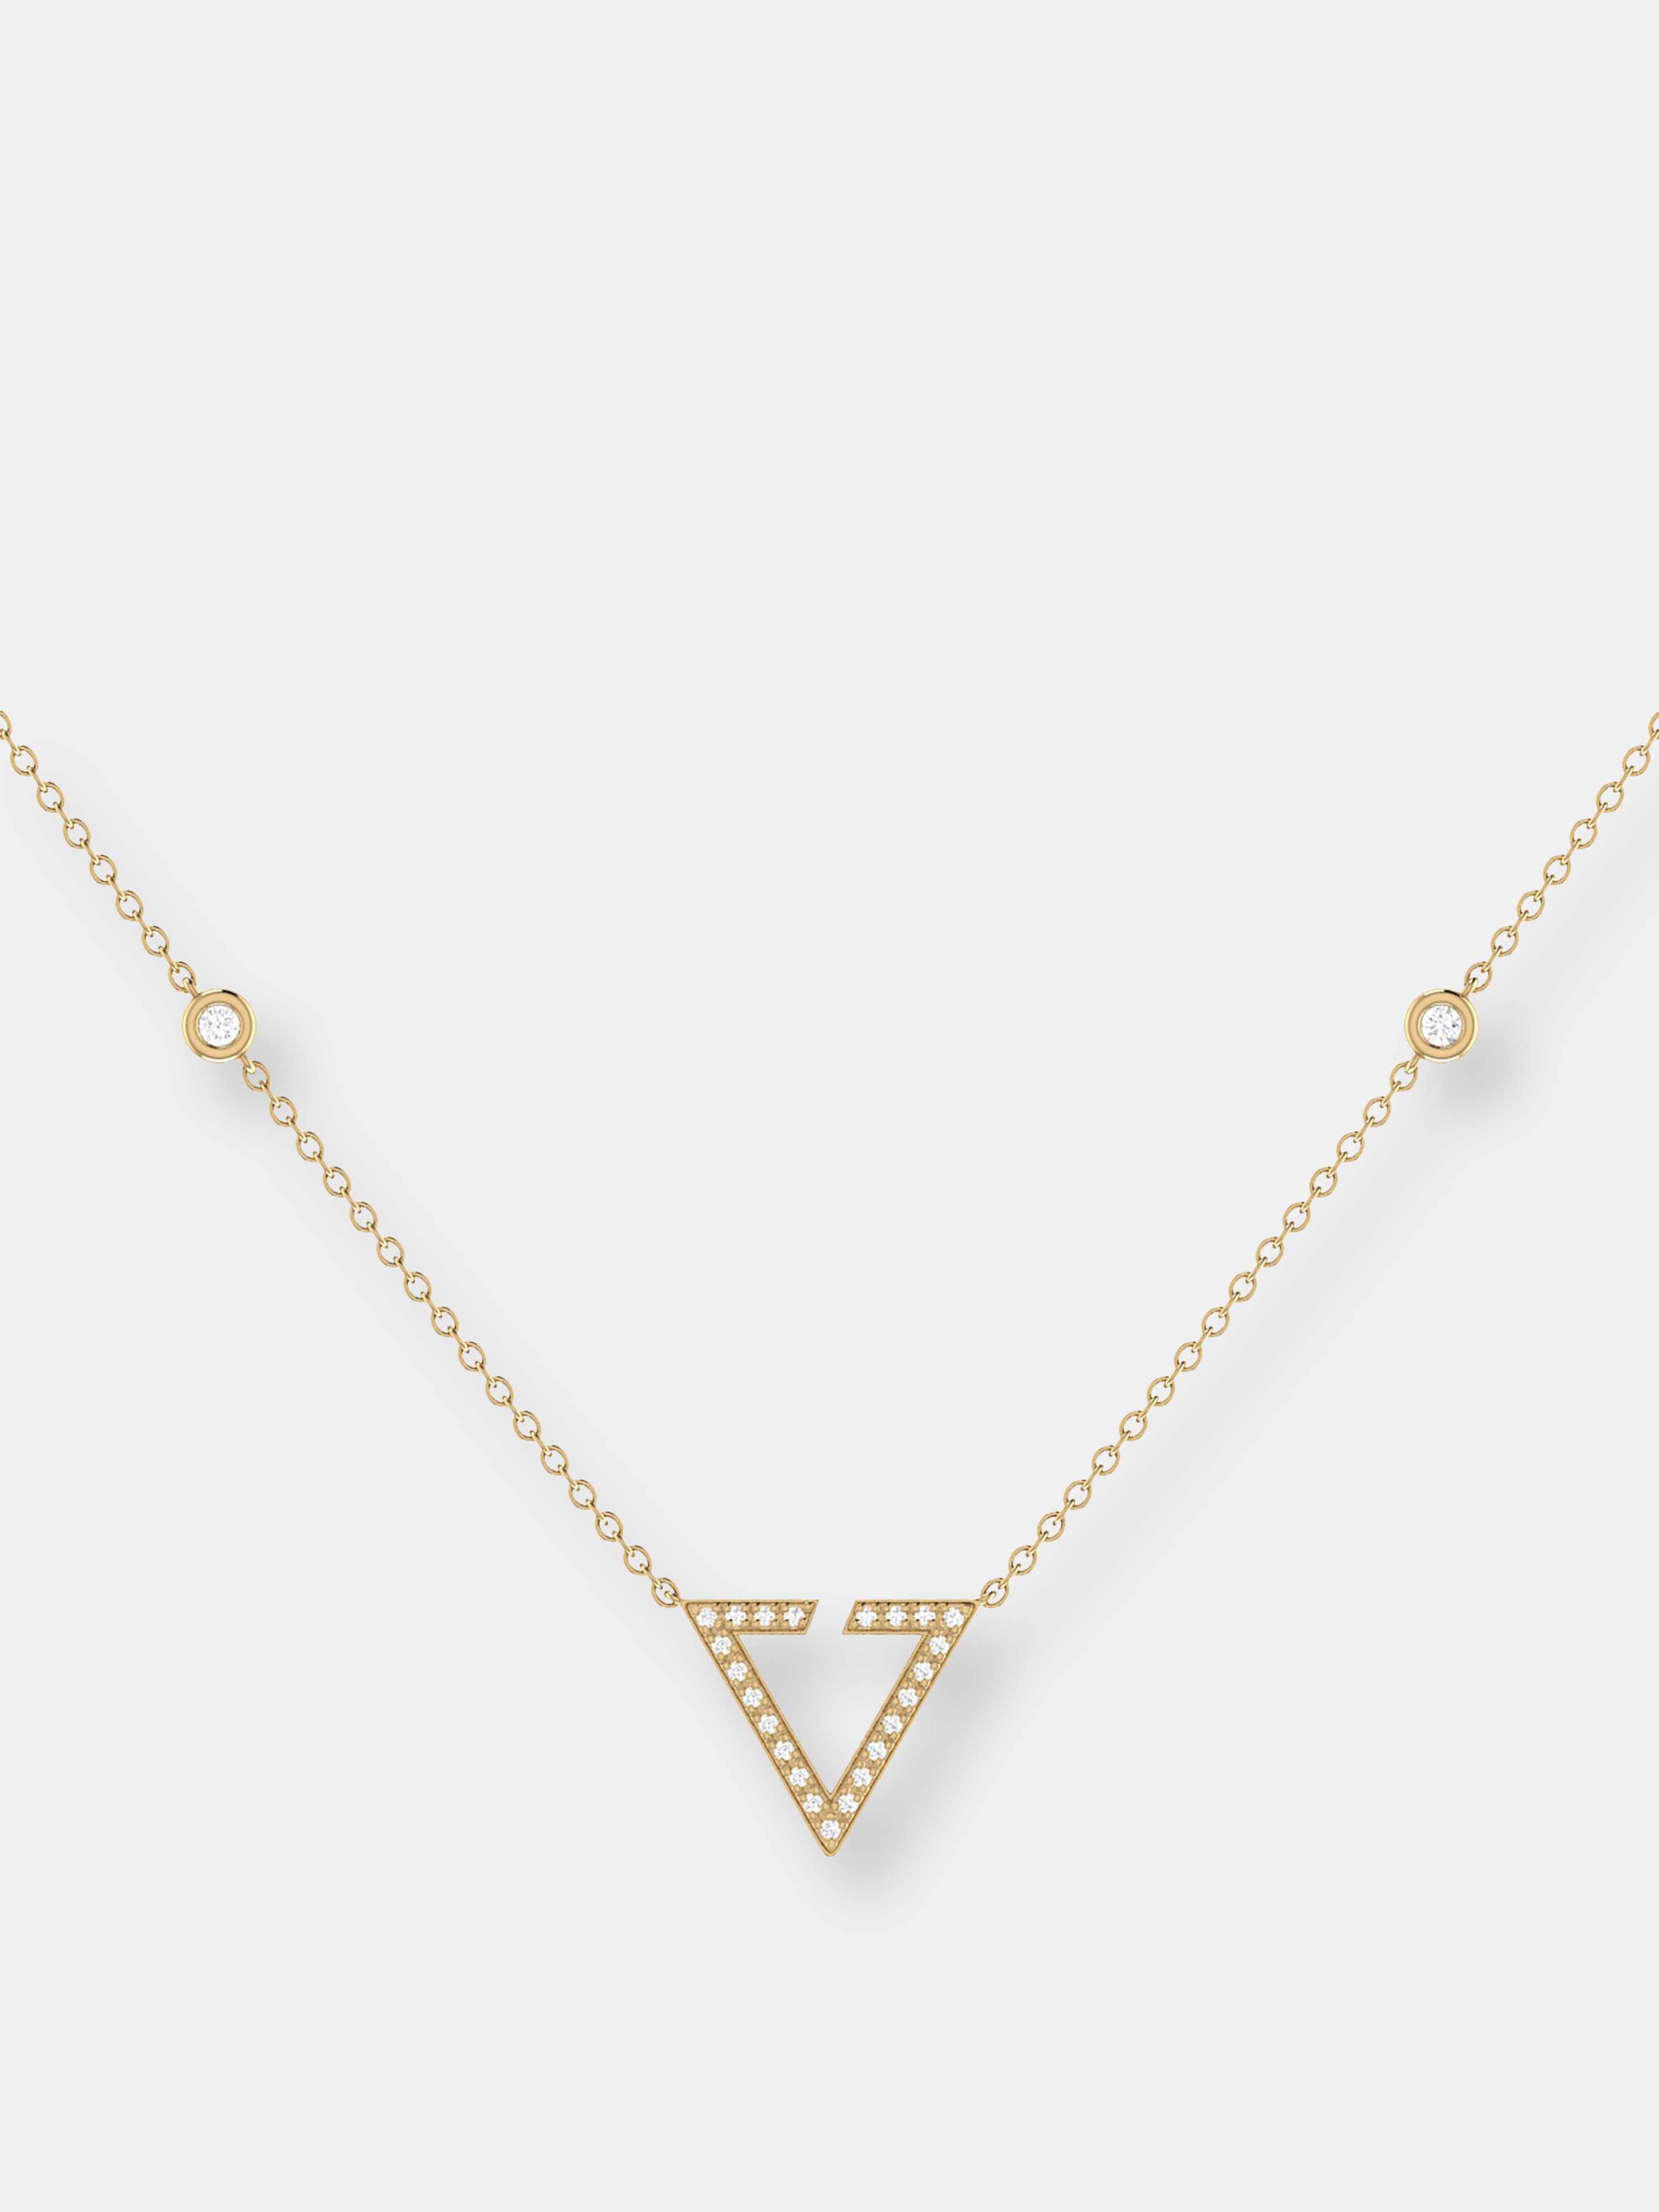 Luvmyjewelry Skyline Triangle Diamond Necklace In 14k Yellow Gold Vermeil On Sterling Silver